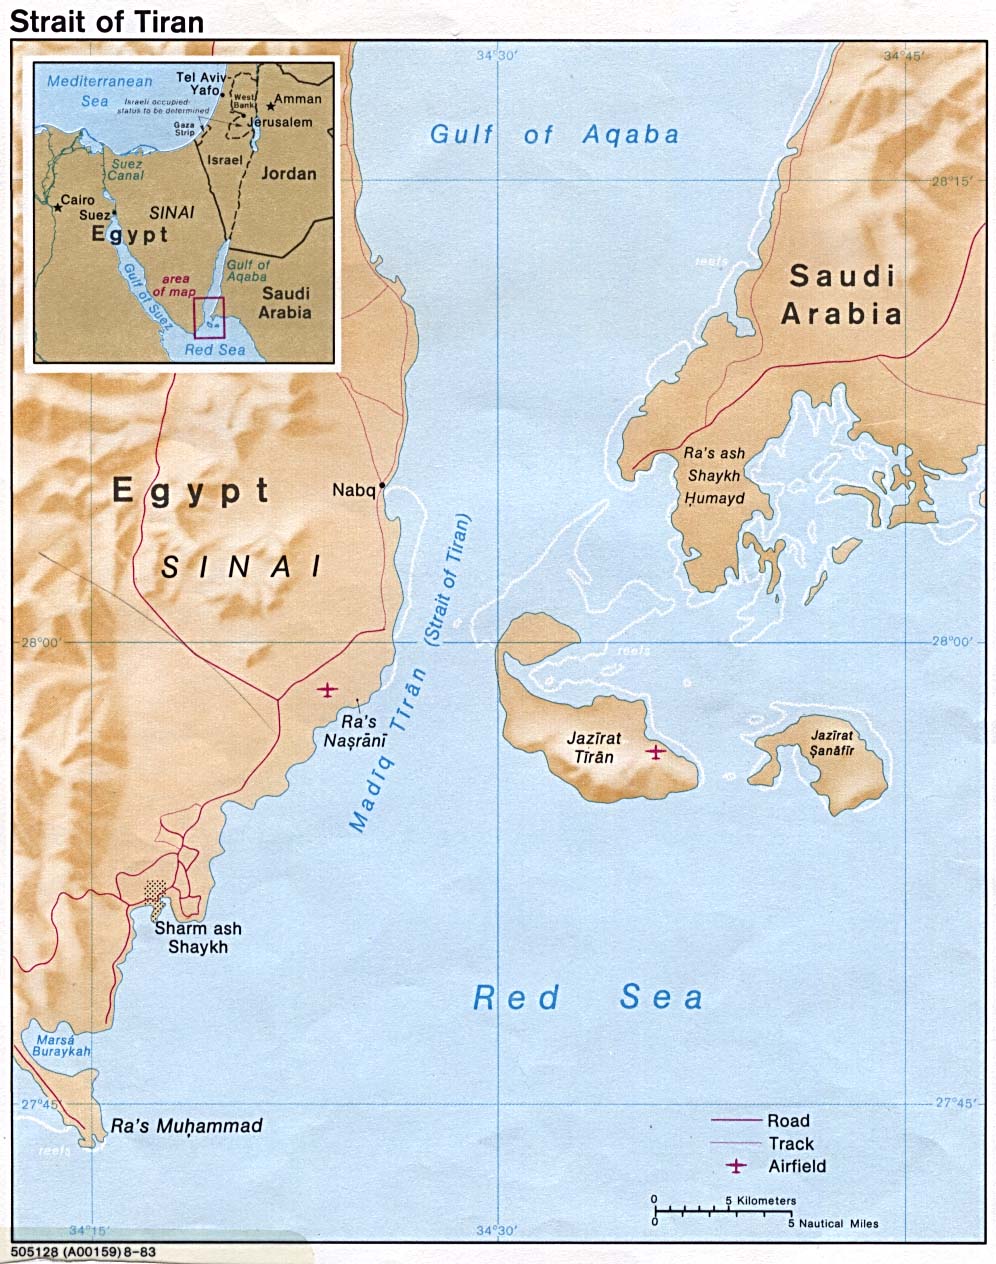 Map Of Middle East Continent. Strait of Tiran 1983 (203K) 